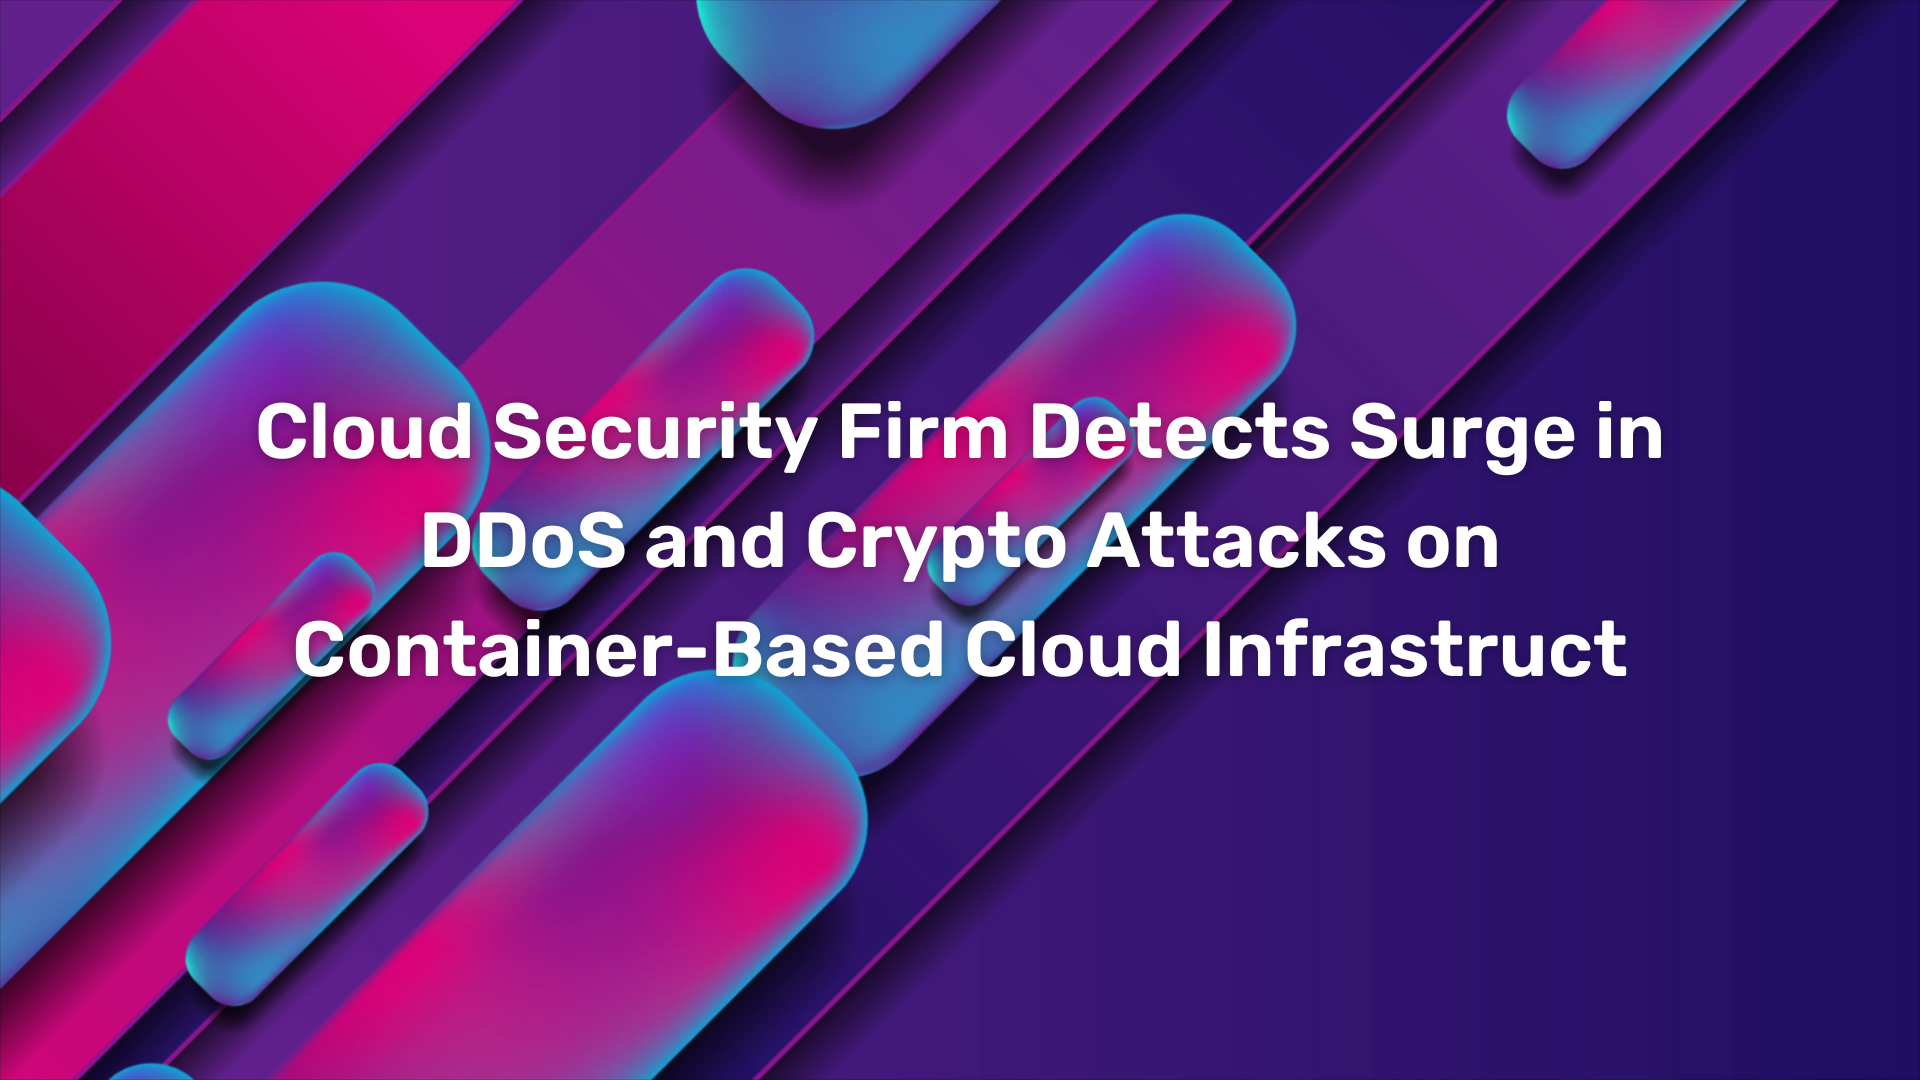 Cloud Security Firm Detects Surge in DDoS and Crypto Attacks on Container-Based Cloud Infrastruct